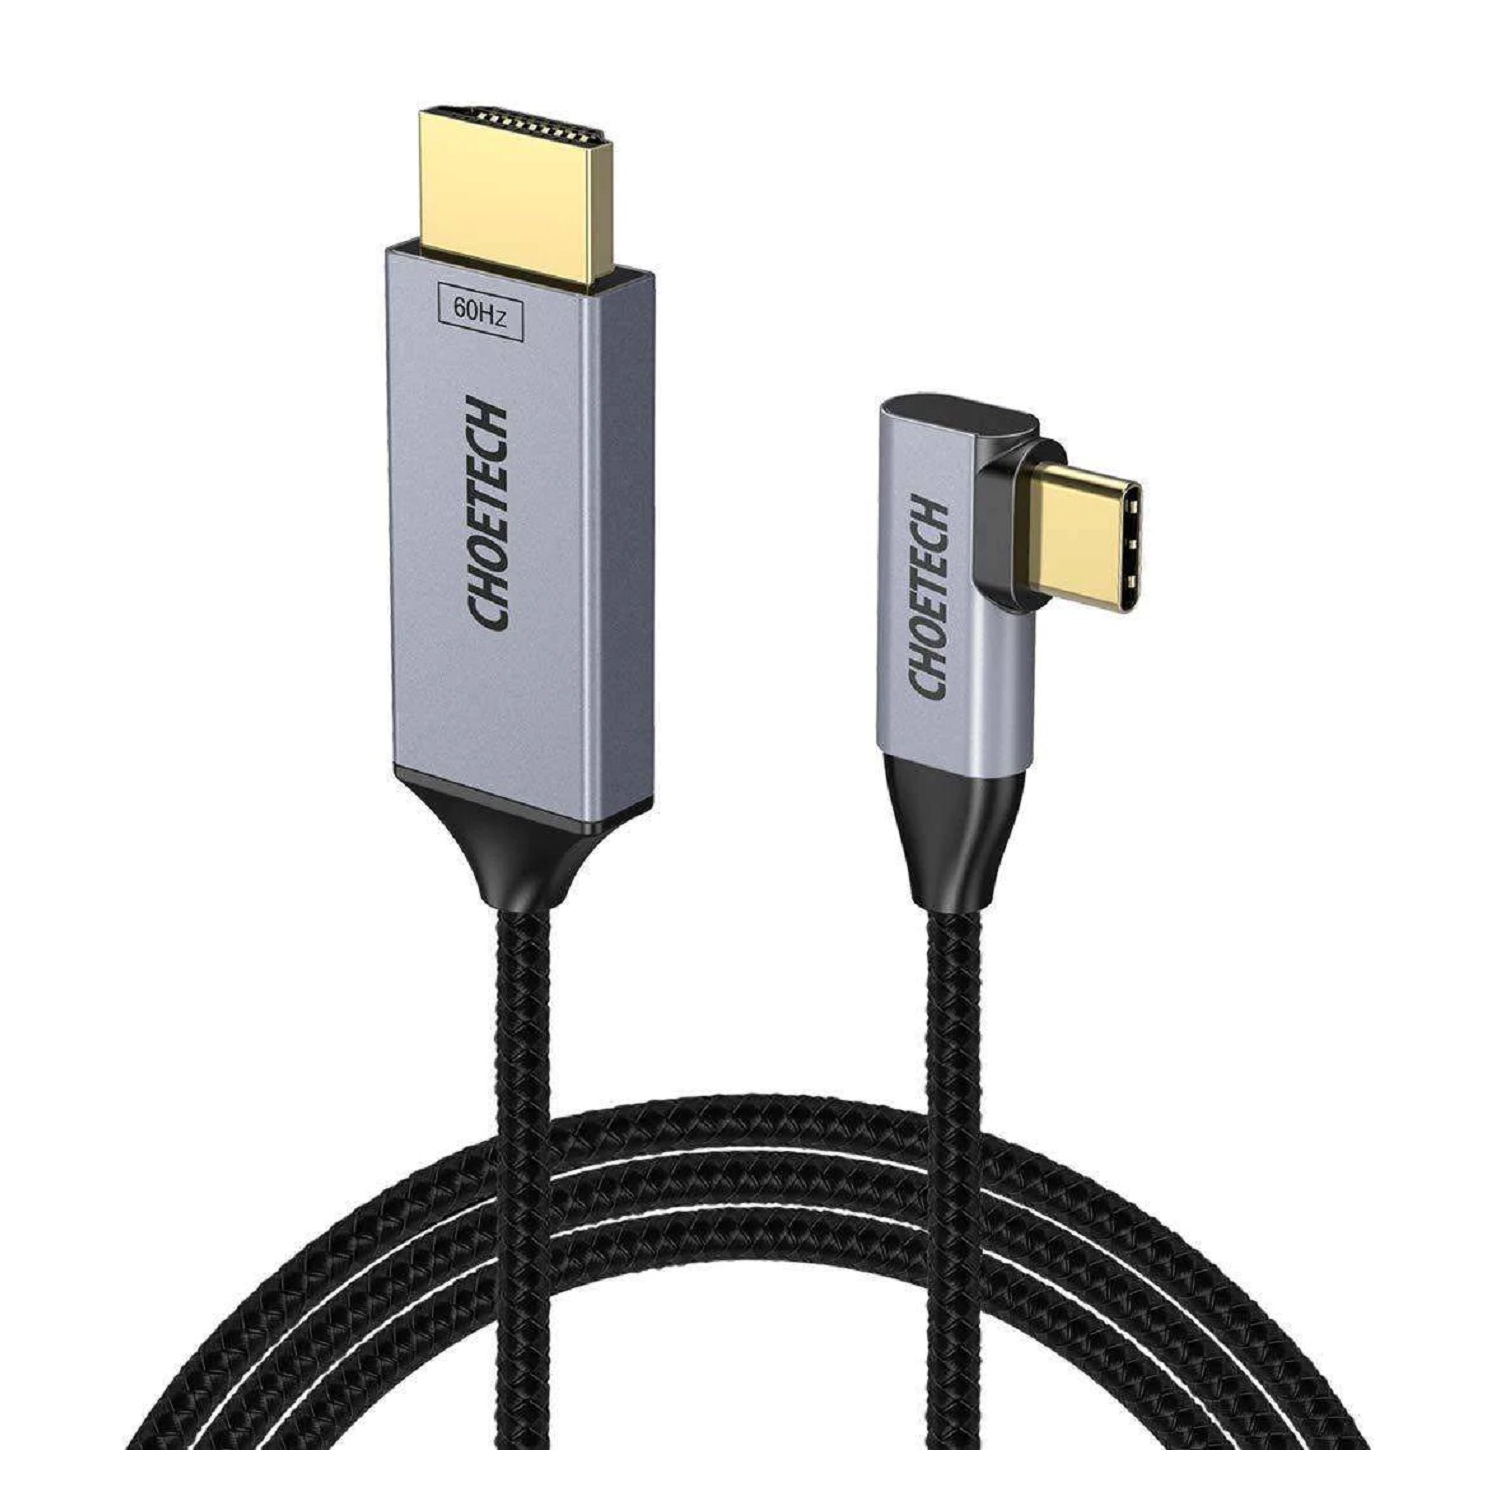 Choetech USB Type-C to HDMI Braided Cable (XCH-1803) - Brand New